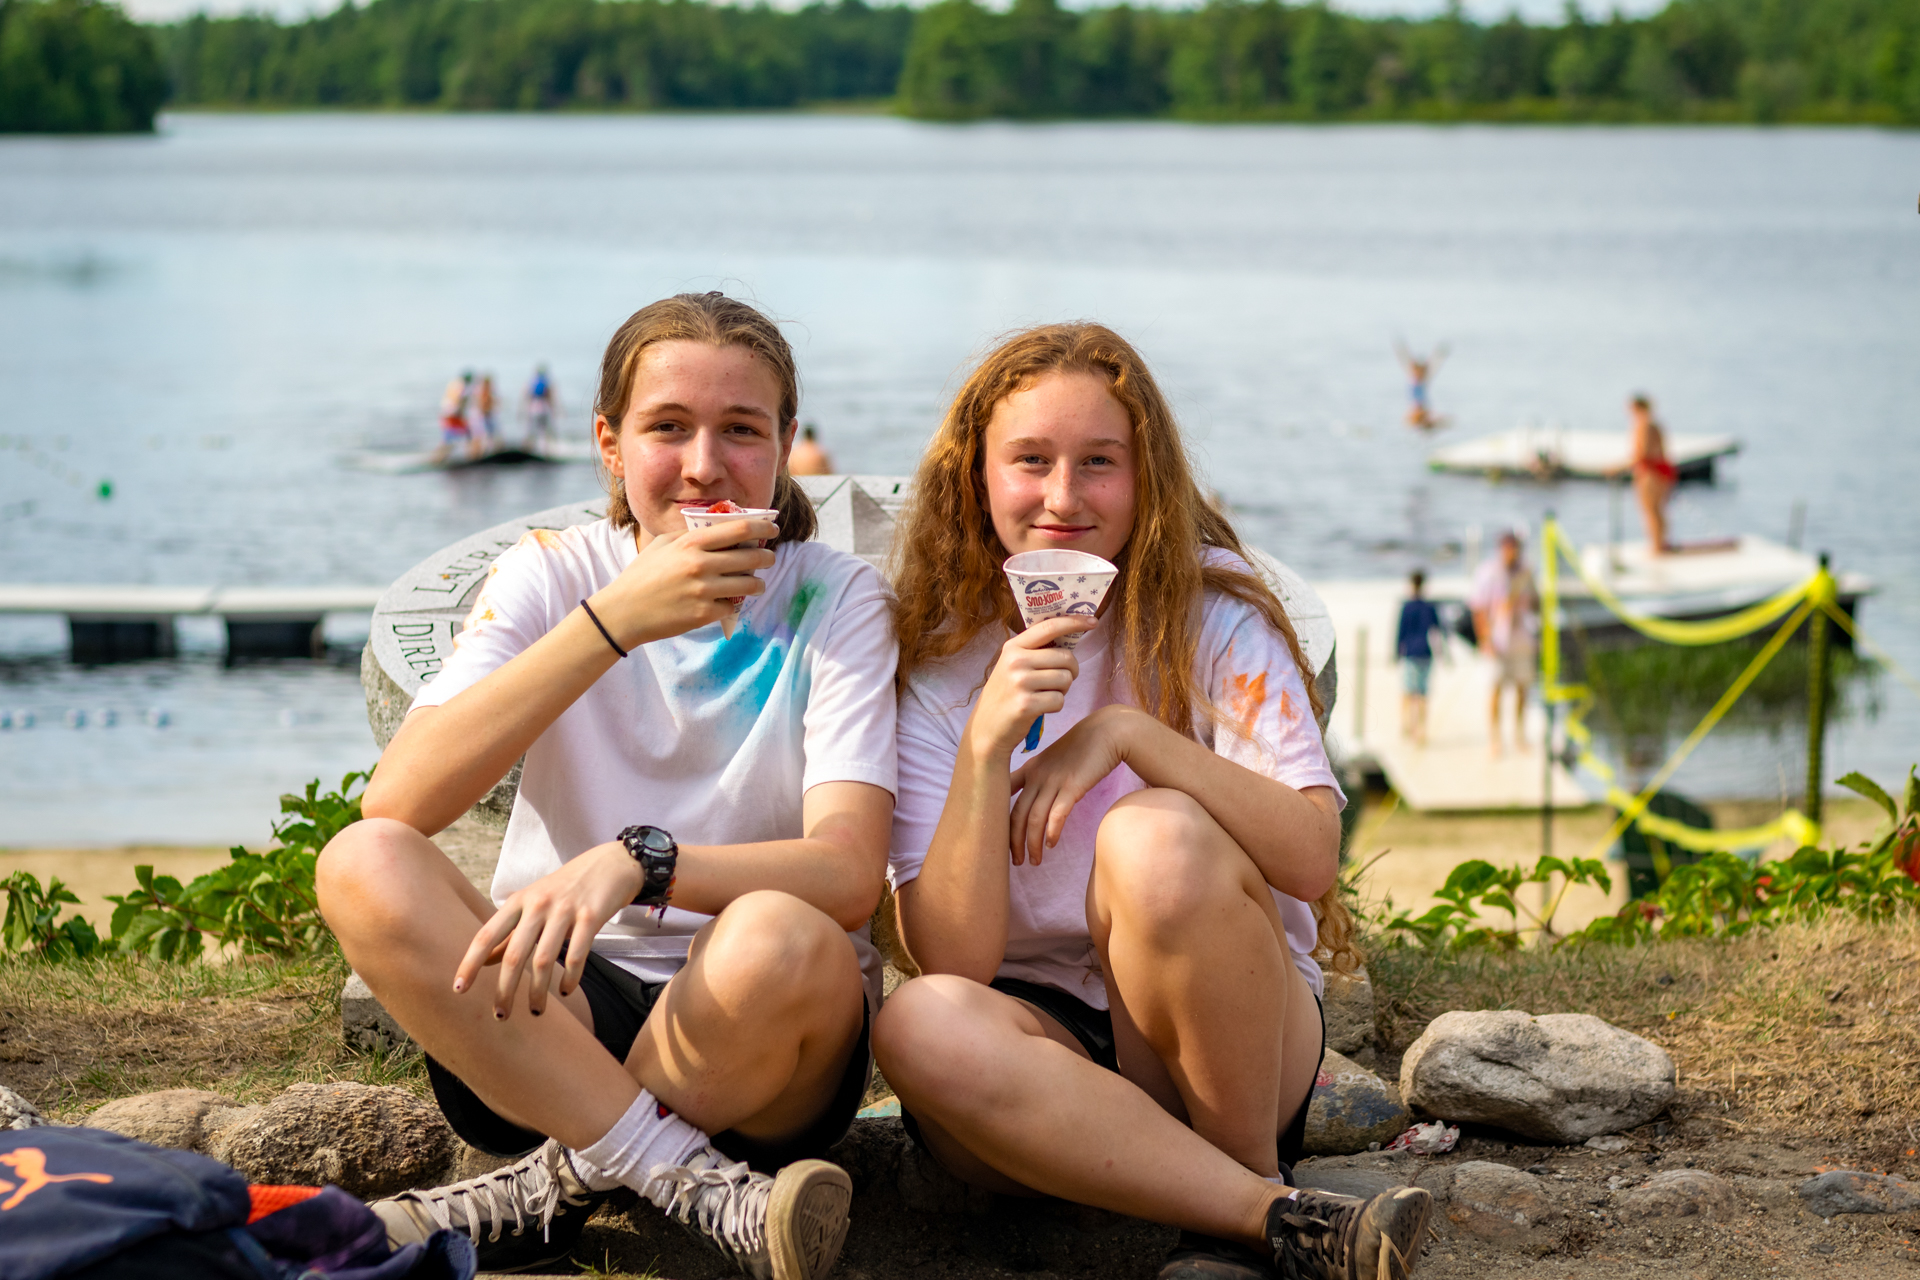 Two girls, about 12 years old, are seated cross-legged, smiling and holding up Sno Cones. In the background, you can see Hubbard Pond and various children swimming and jumping off the docks.